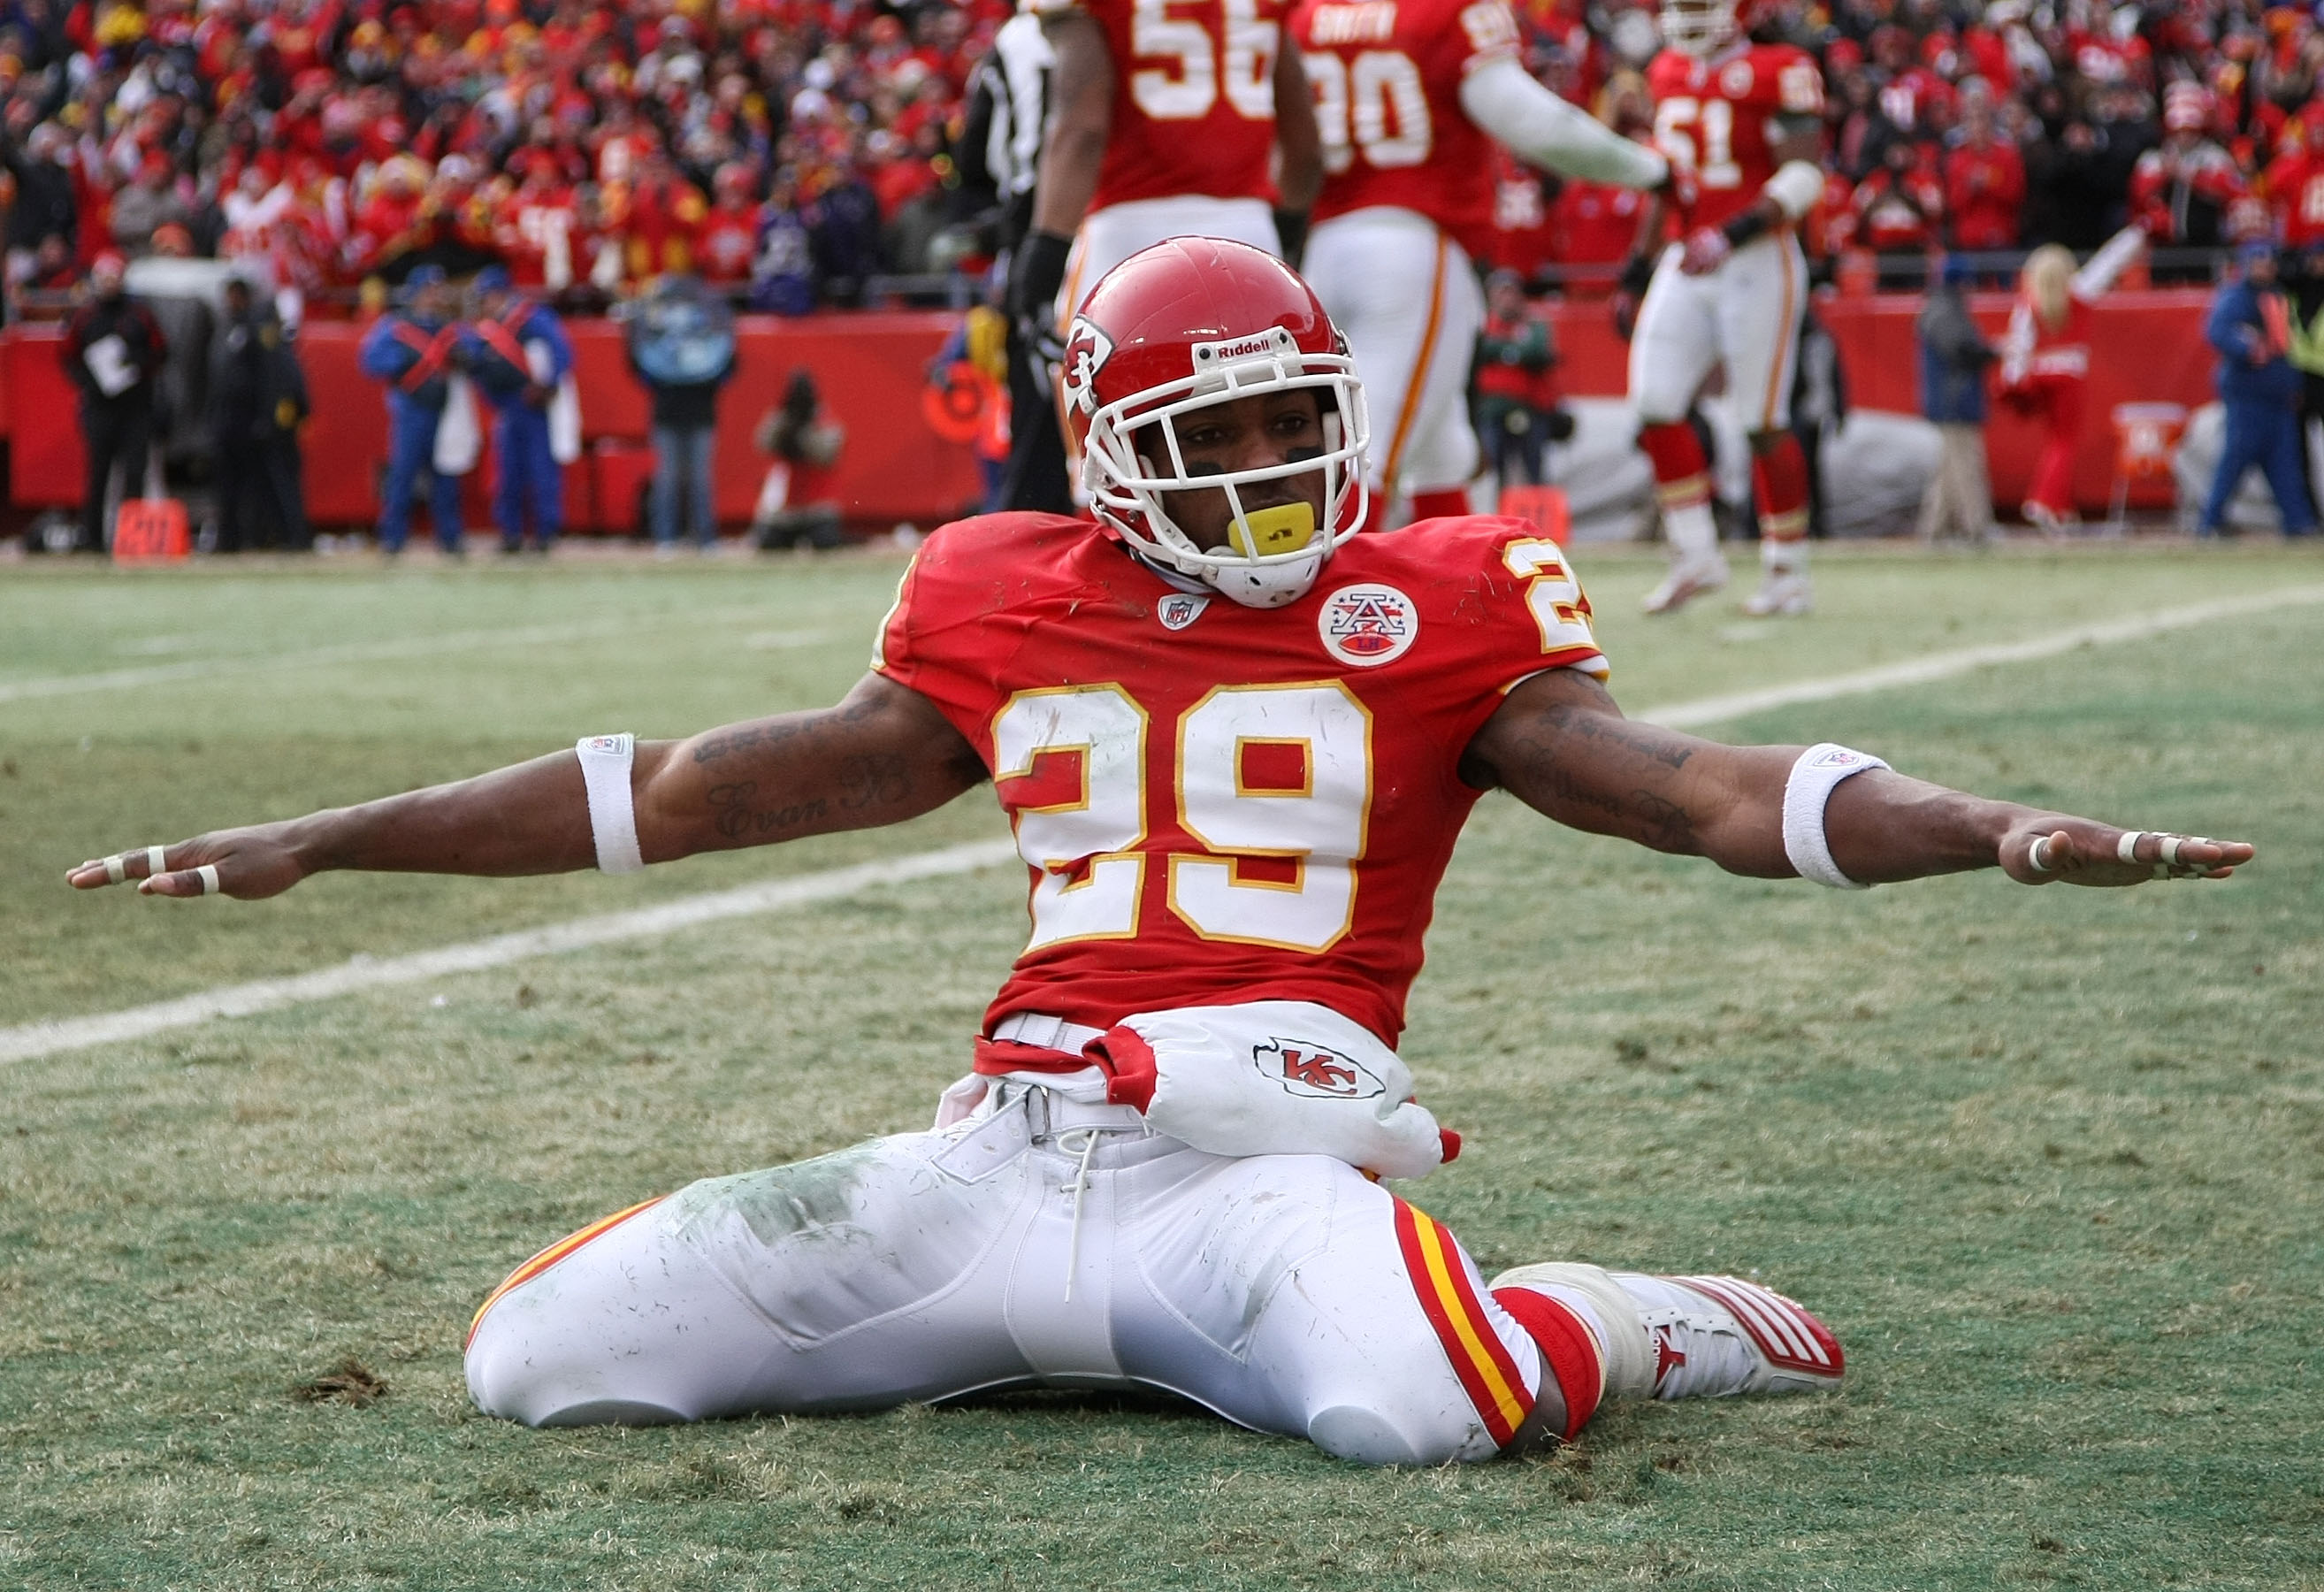 KANSAS CITY, MO - JANUARY 09:  Safety Eric Berry #29 of the Kansas City Chiefs celebrates after breaking up a pass to tight end Todd Heap #86 of the Baltimore Ravens in the endzone during their 2011 AFC wild card playoff game at Arrowhead Stadium on Janua